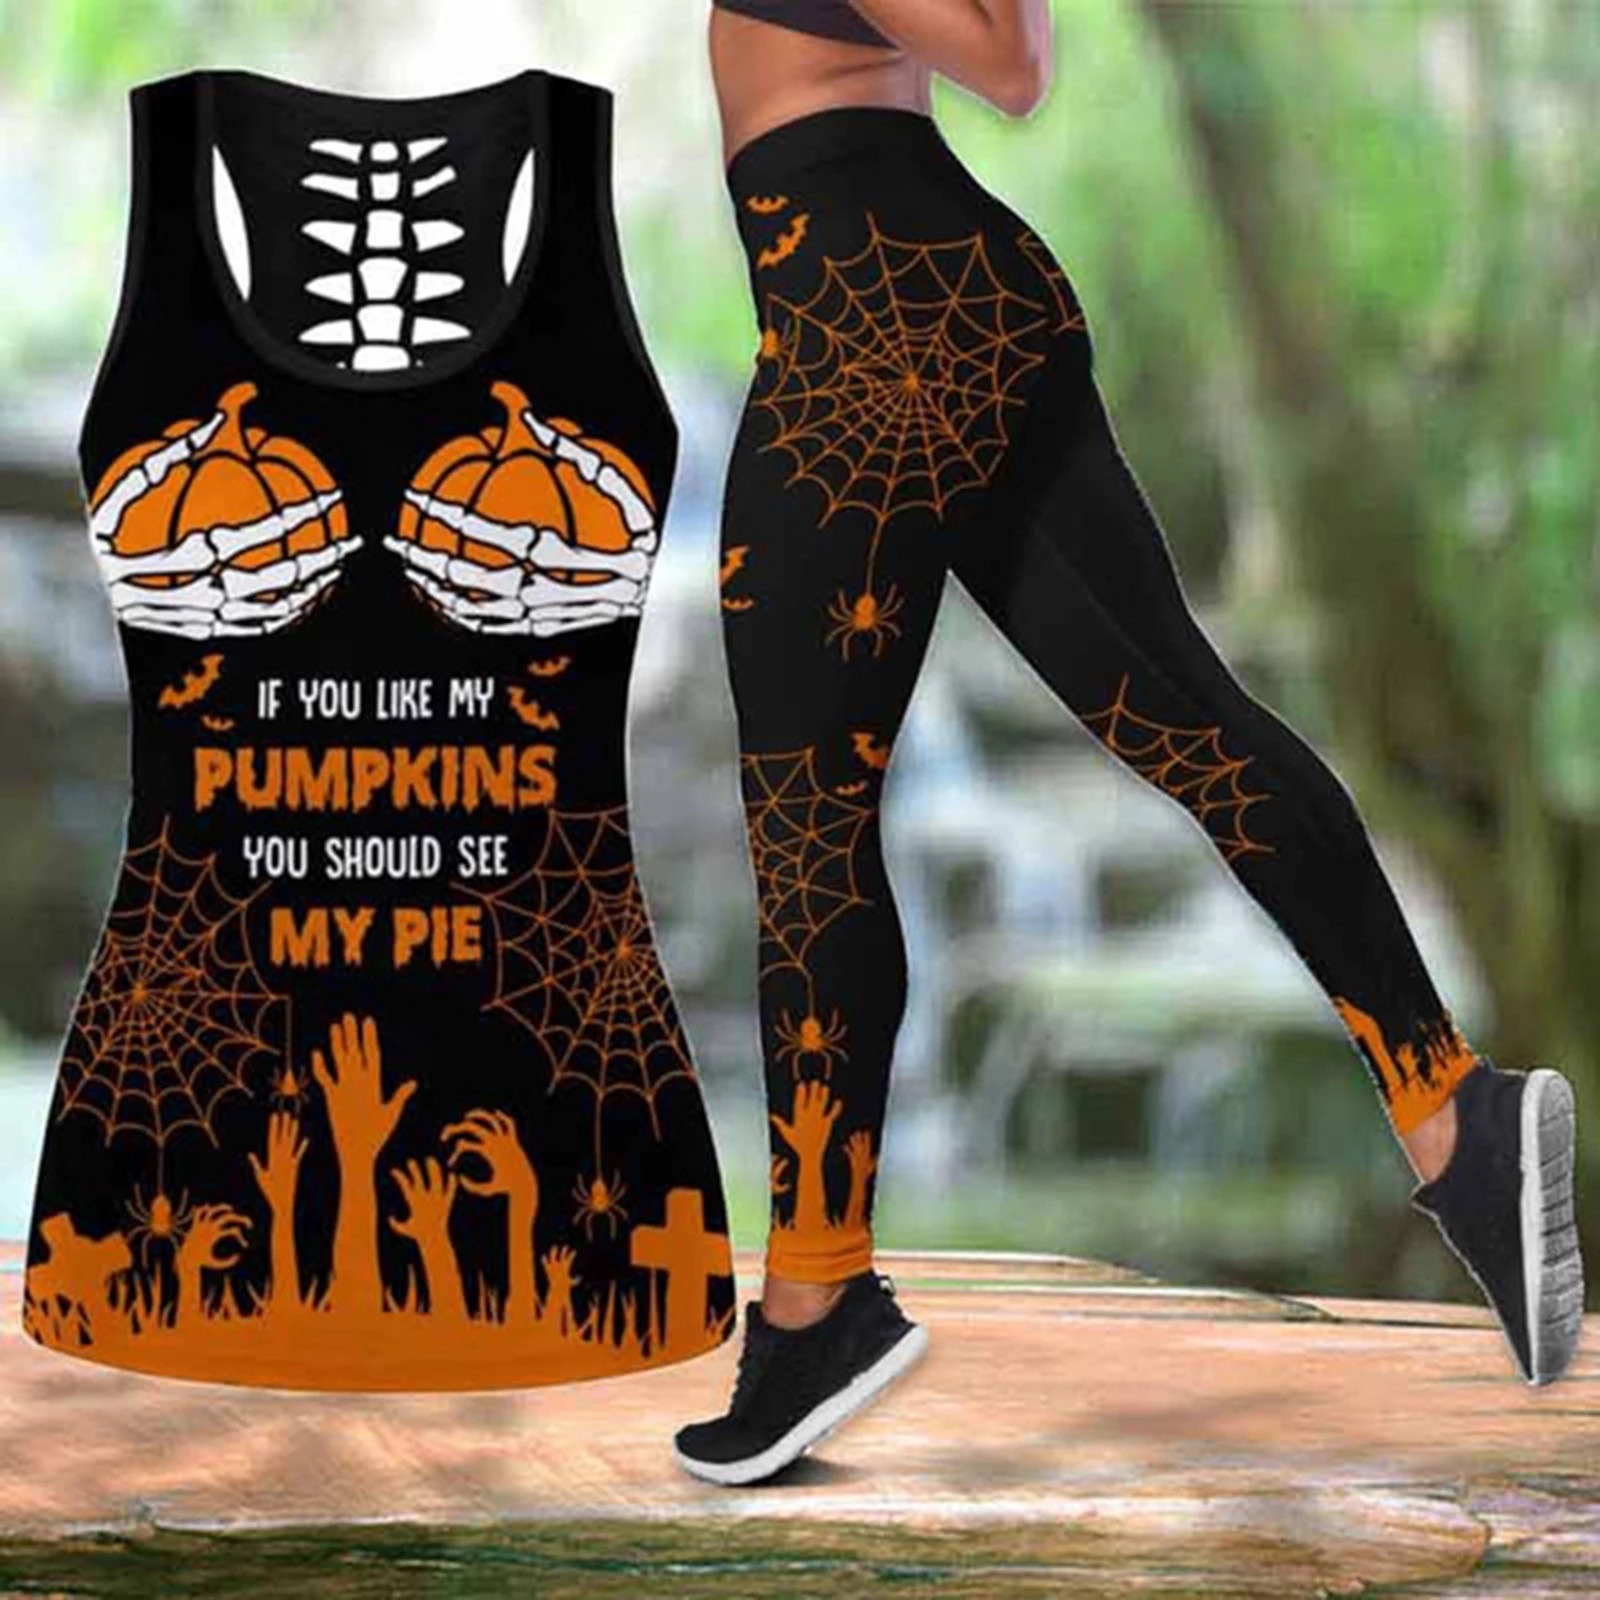 If you like my pumpkin you should see my pie legging and tank top